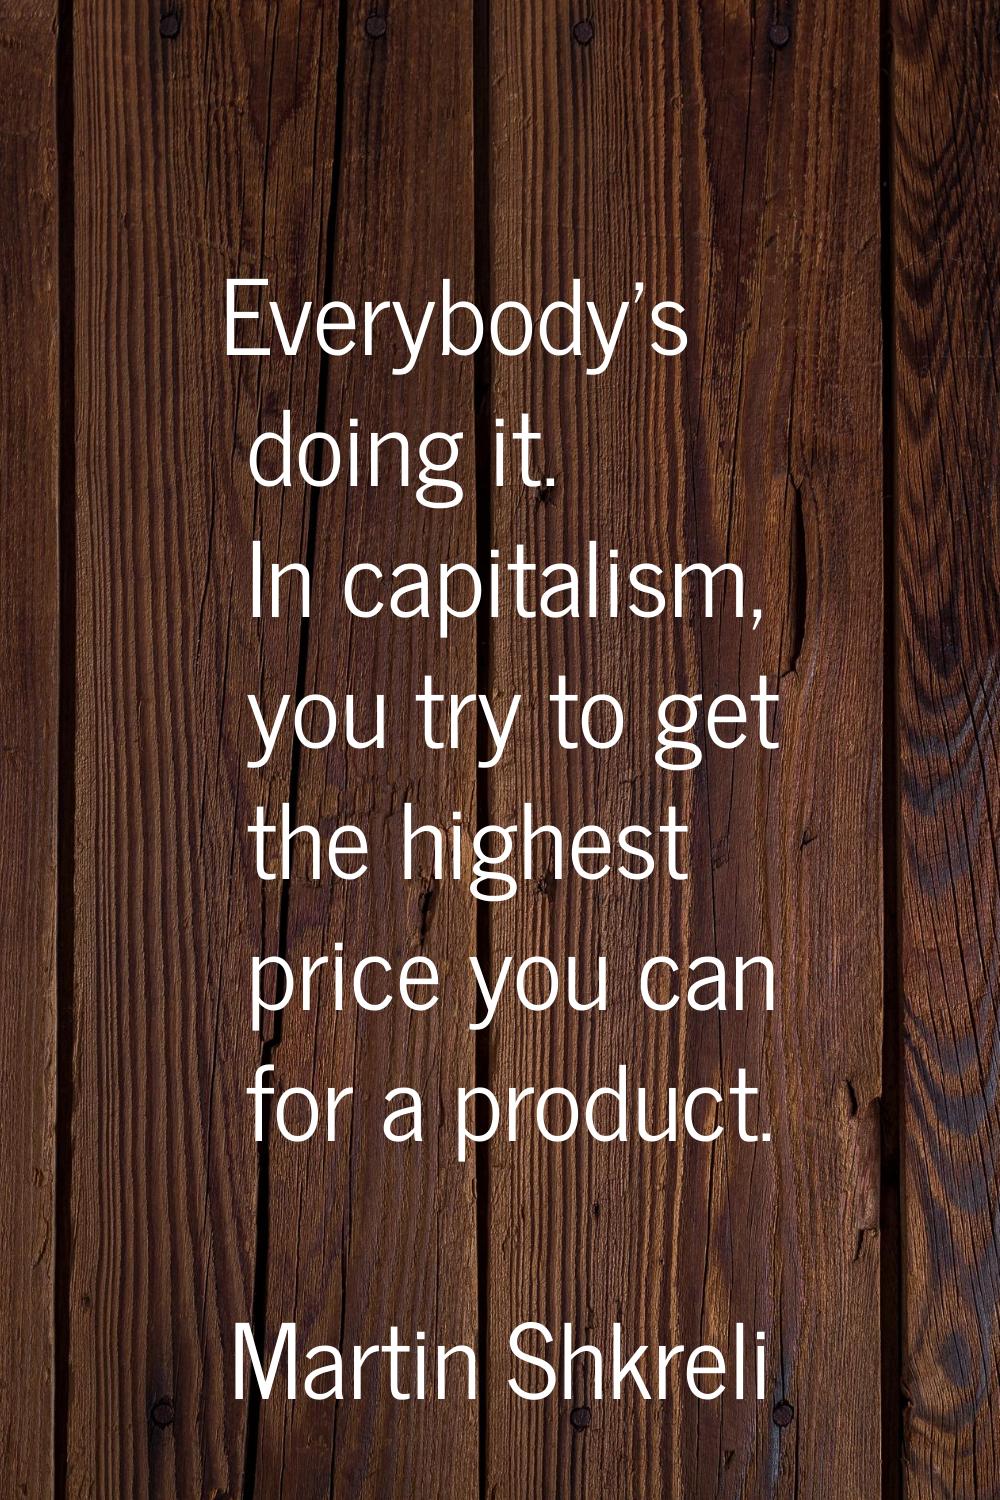 Everybody's doing it. In capitalism, you try to get the highest price you can for a product.